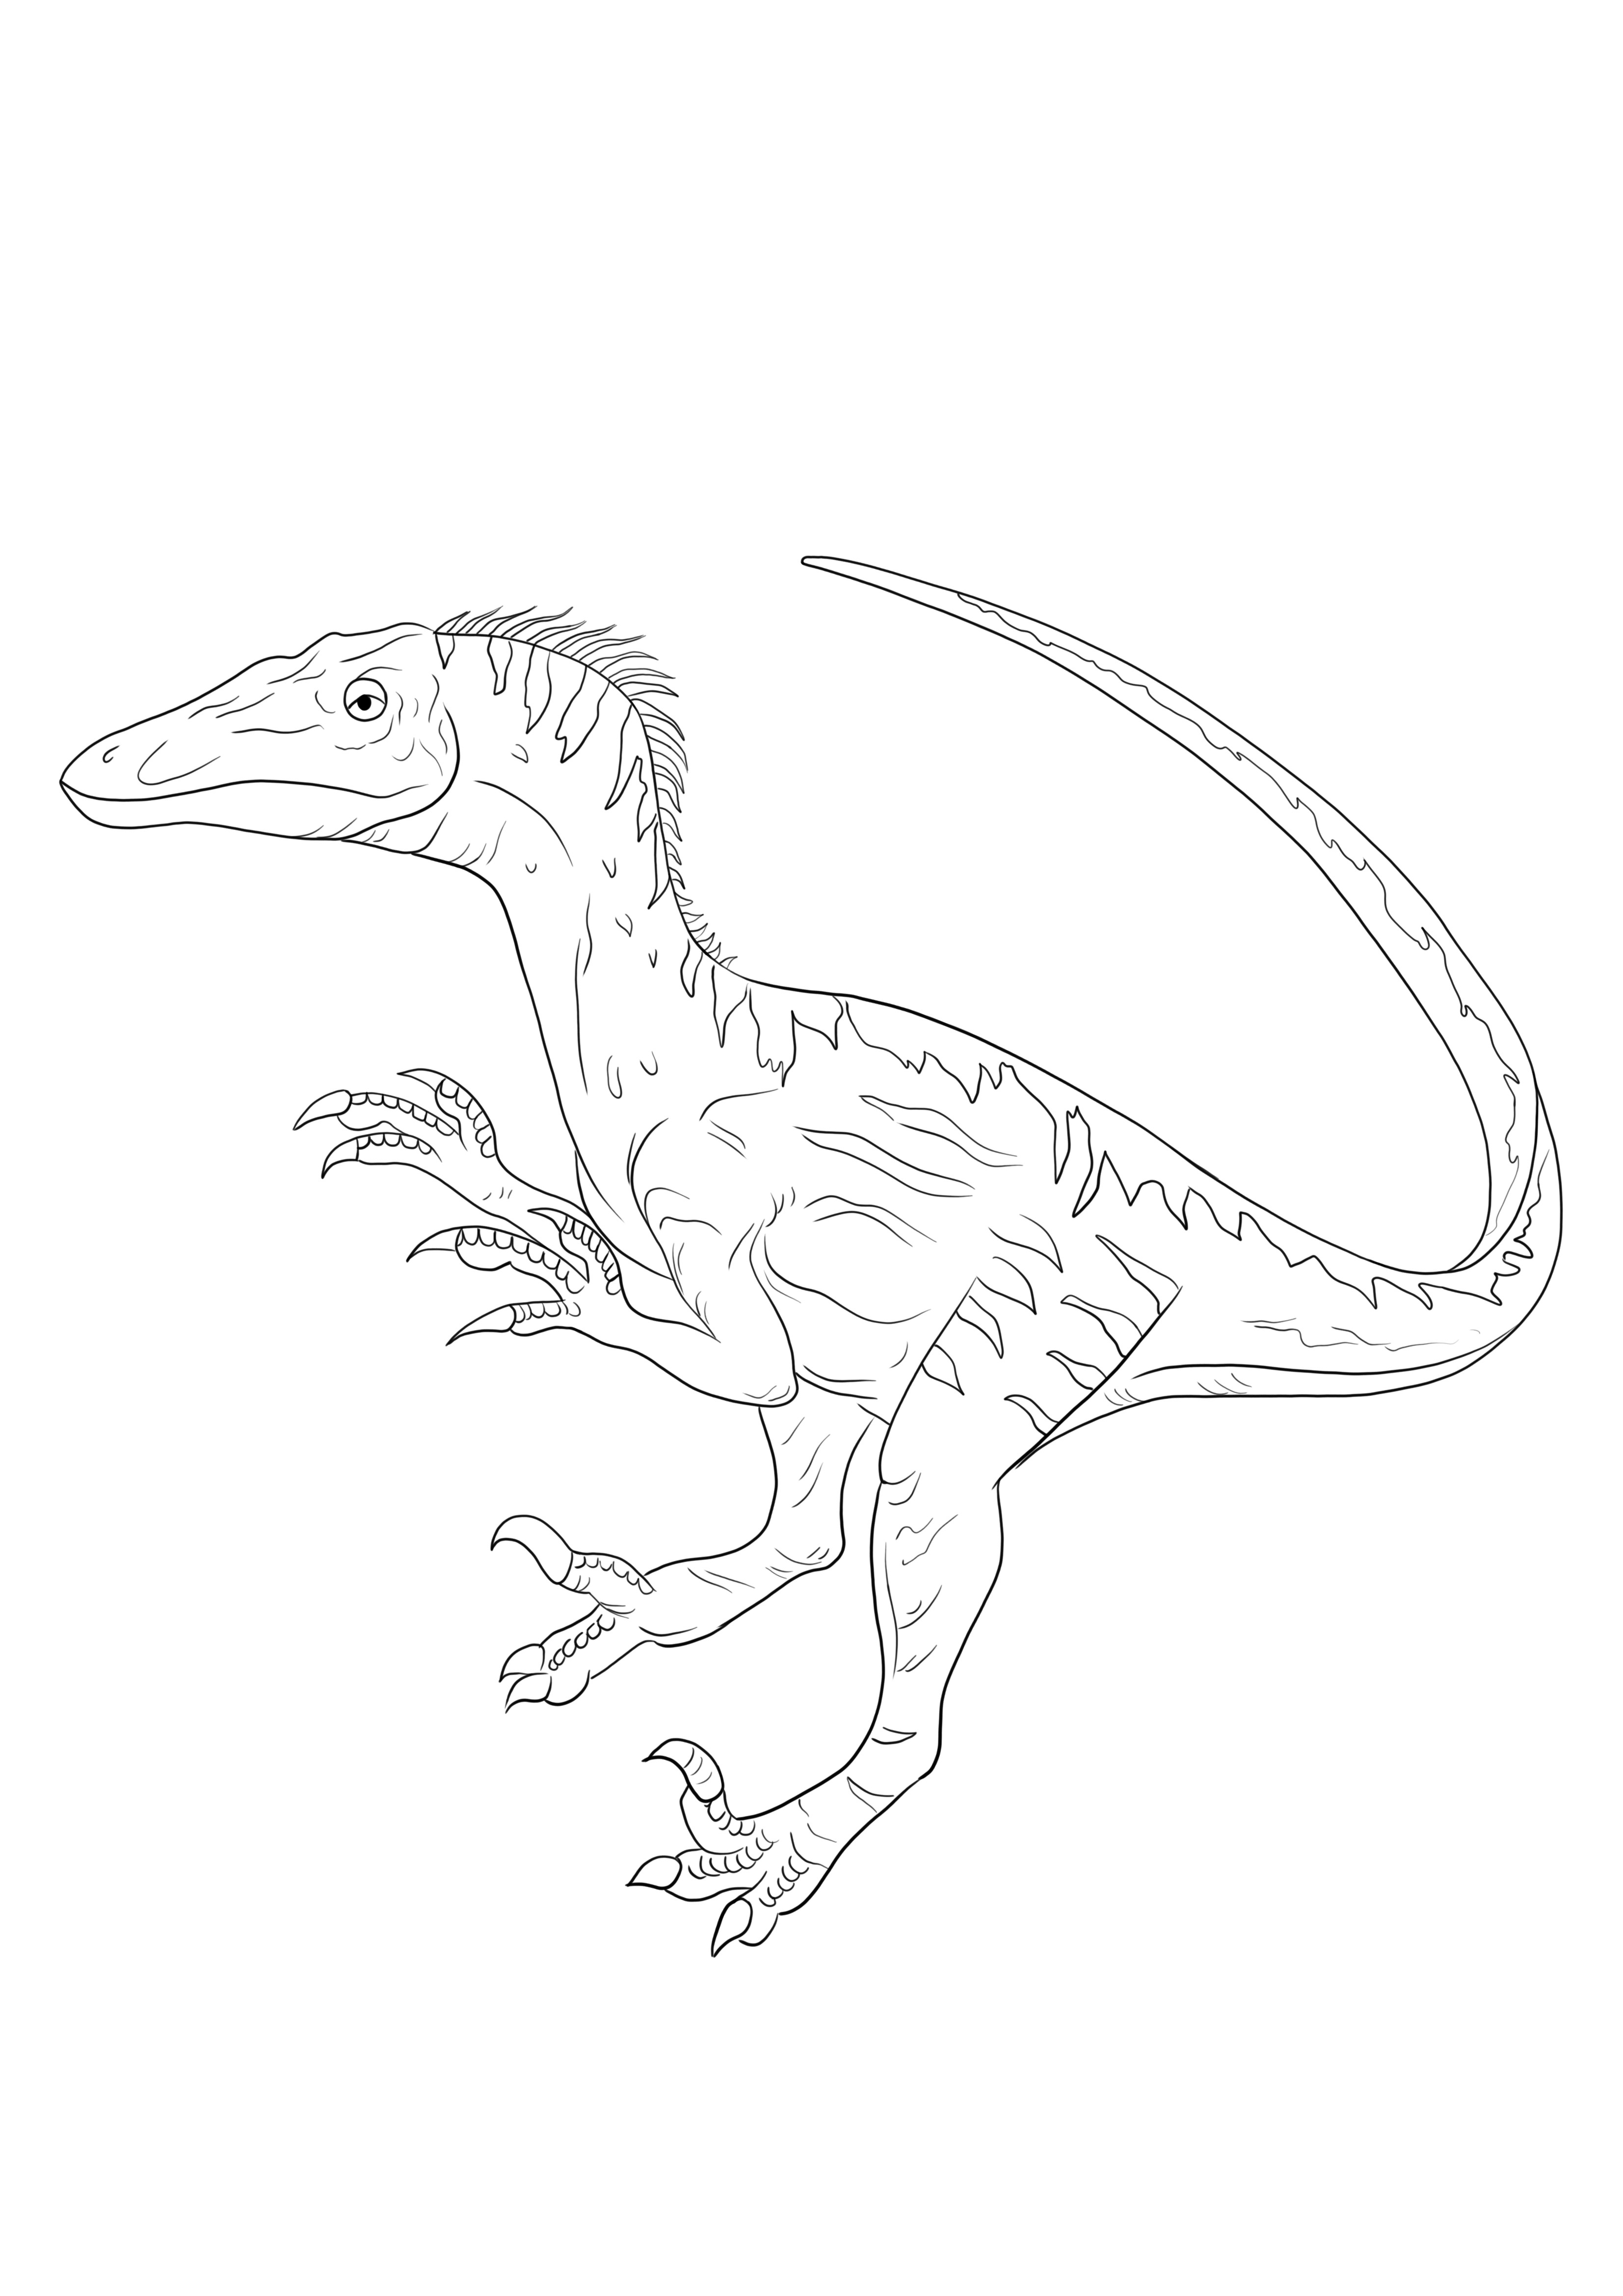 Big Velociraptor to download free and to color picture